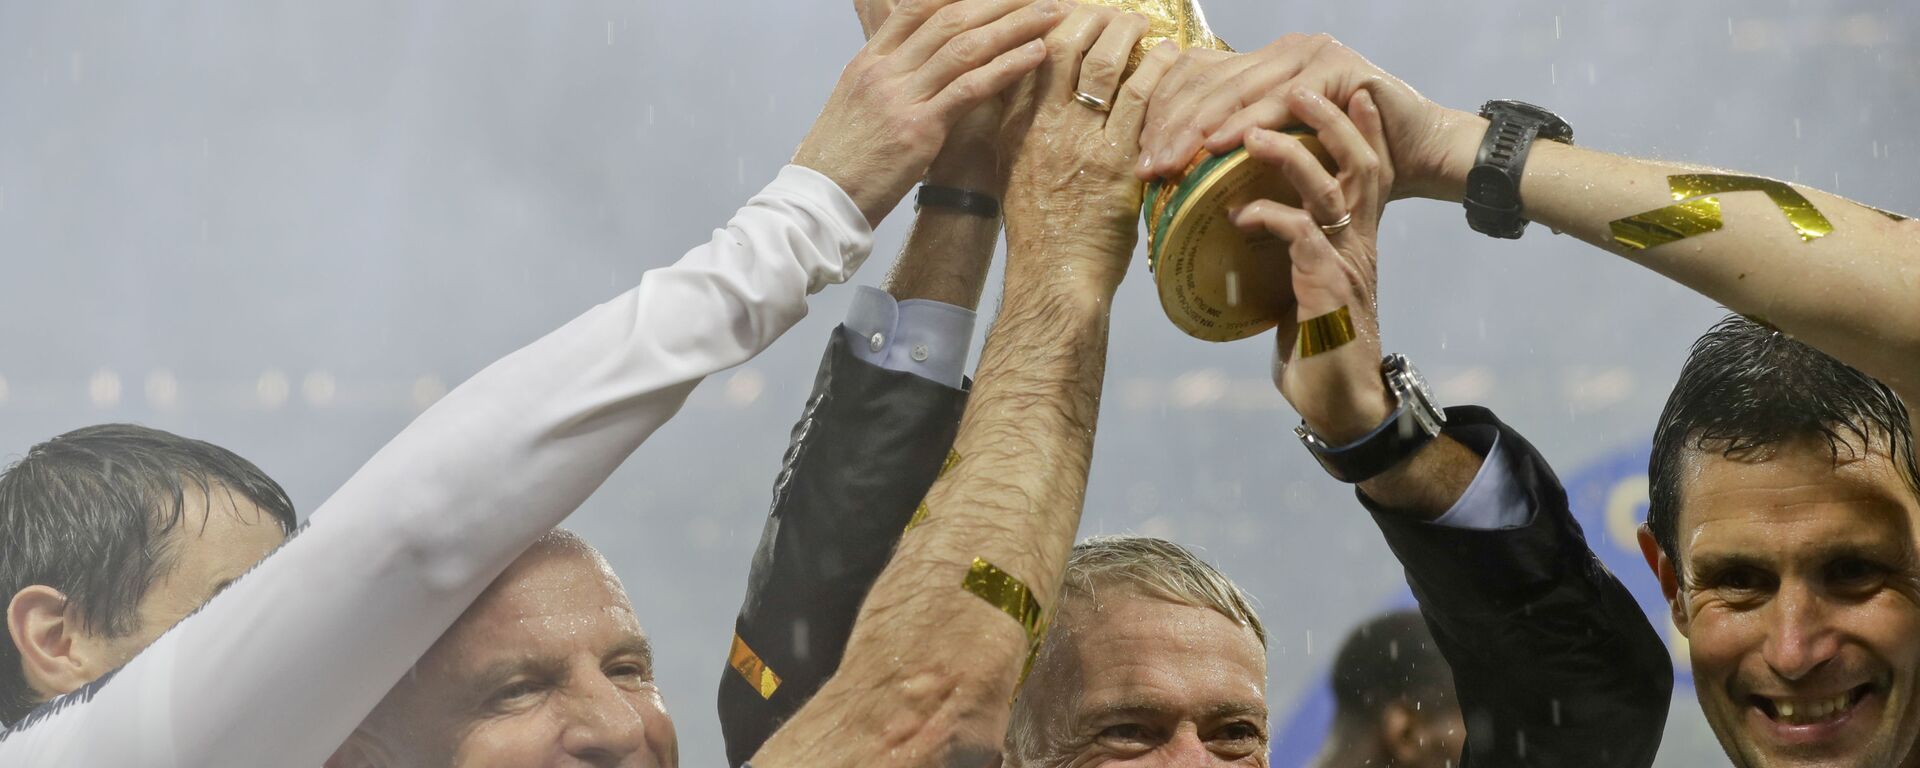 France head coach Didier Deschamps holds the World Cup after defeating Croatia in the 2018 final in Moscow. - Sputnik International, 1920, 24.11.2021